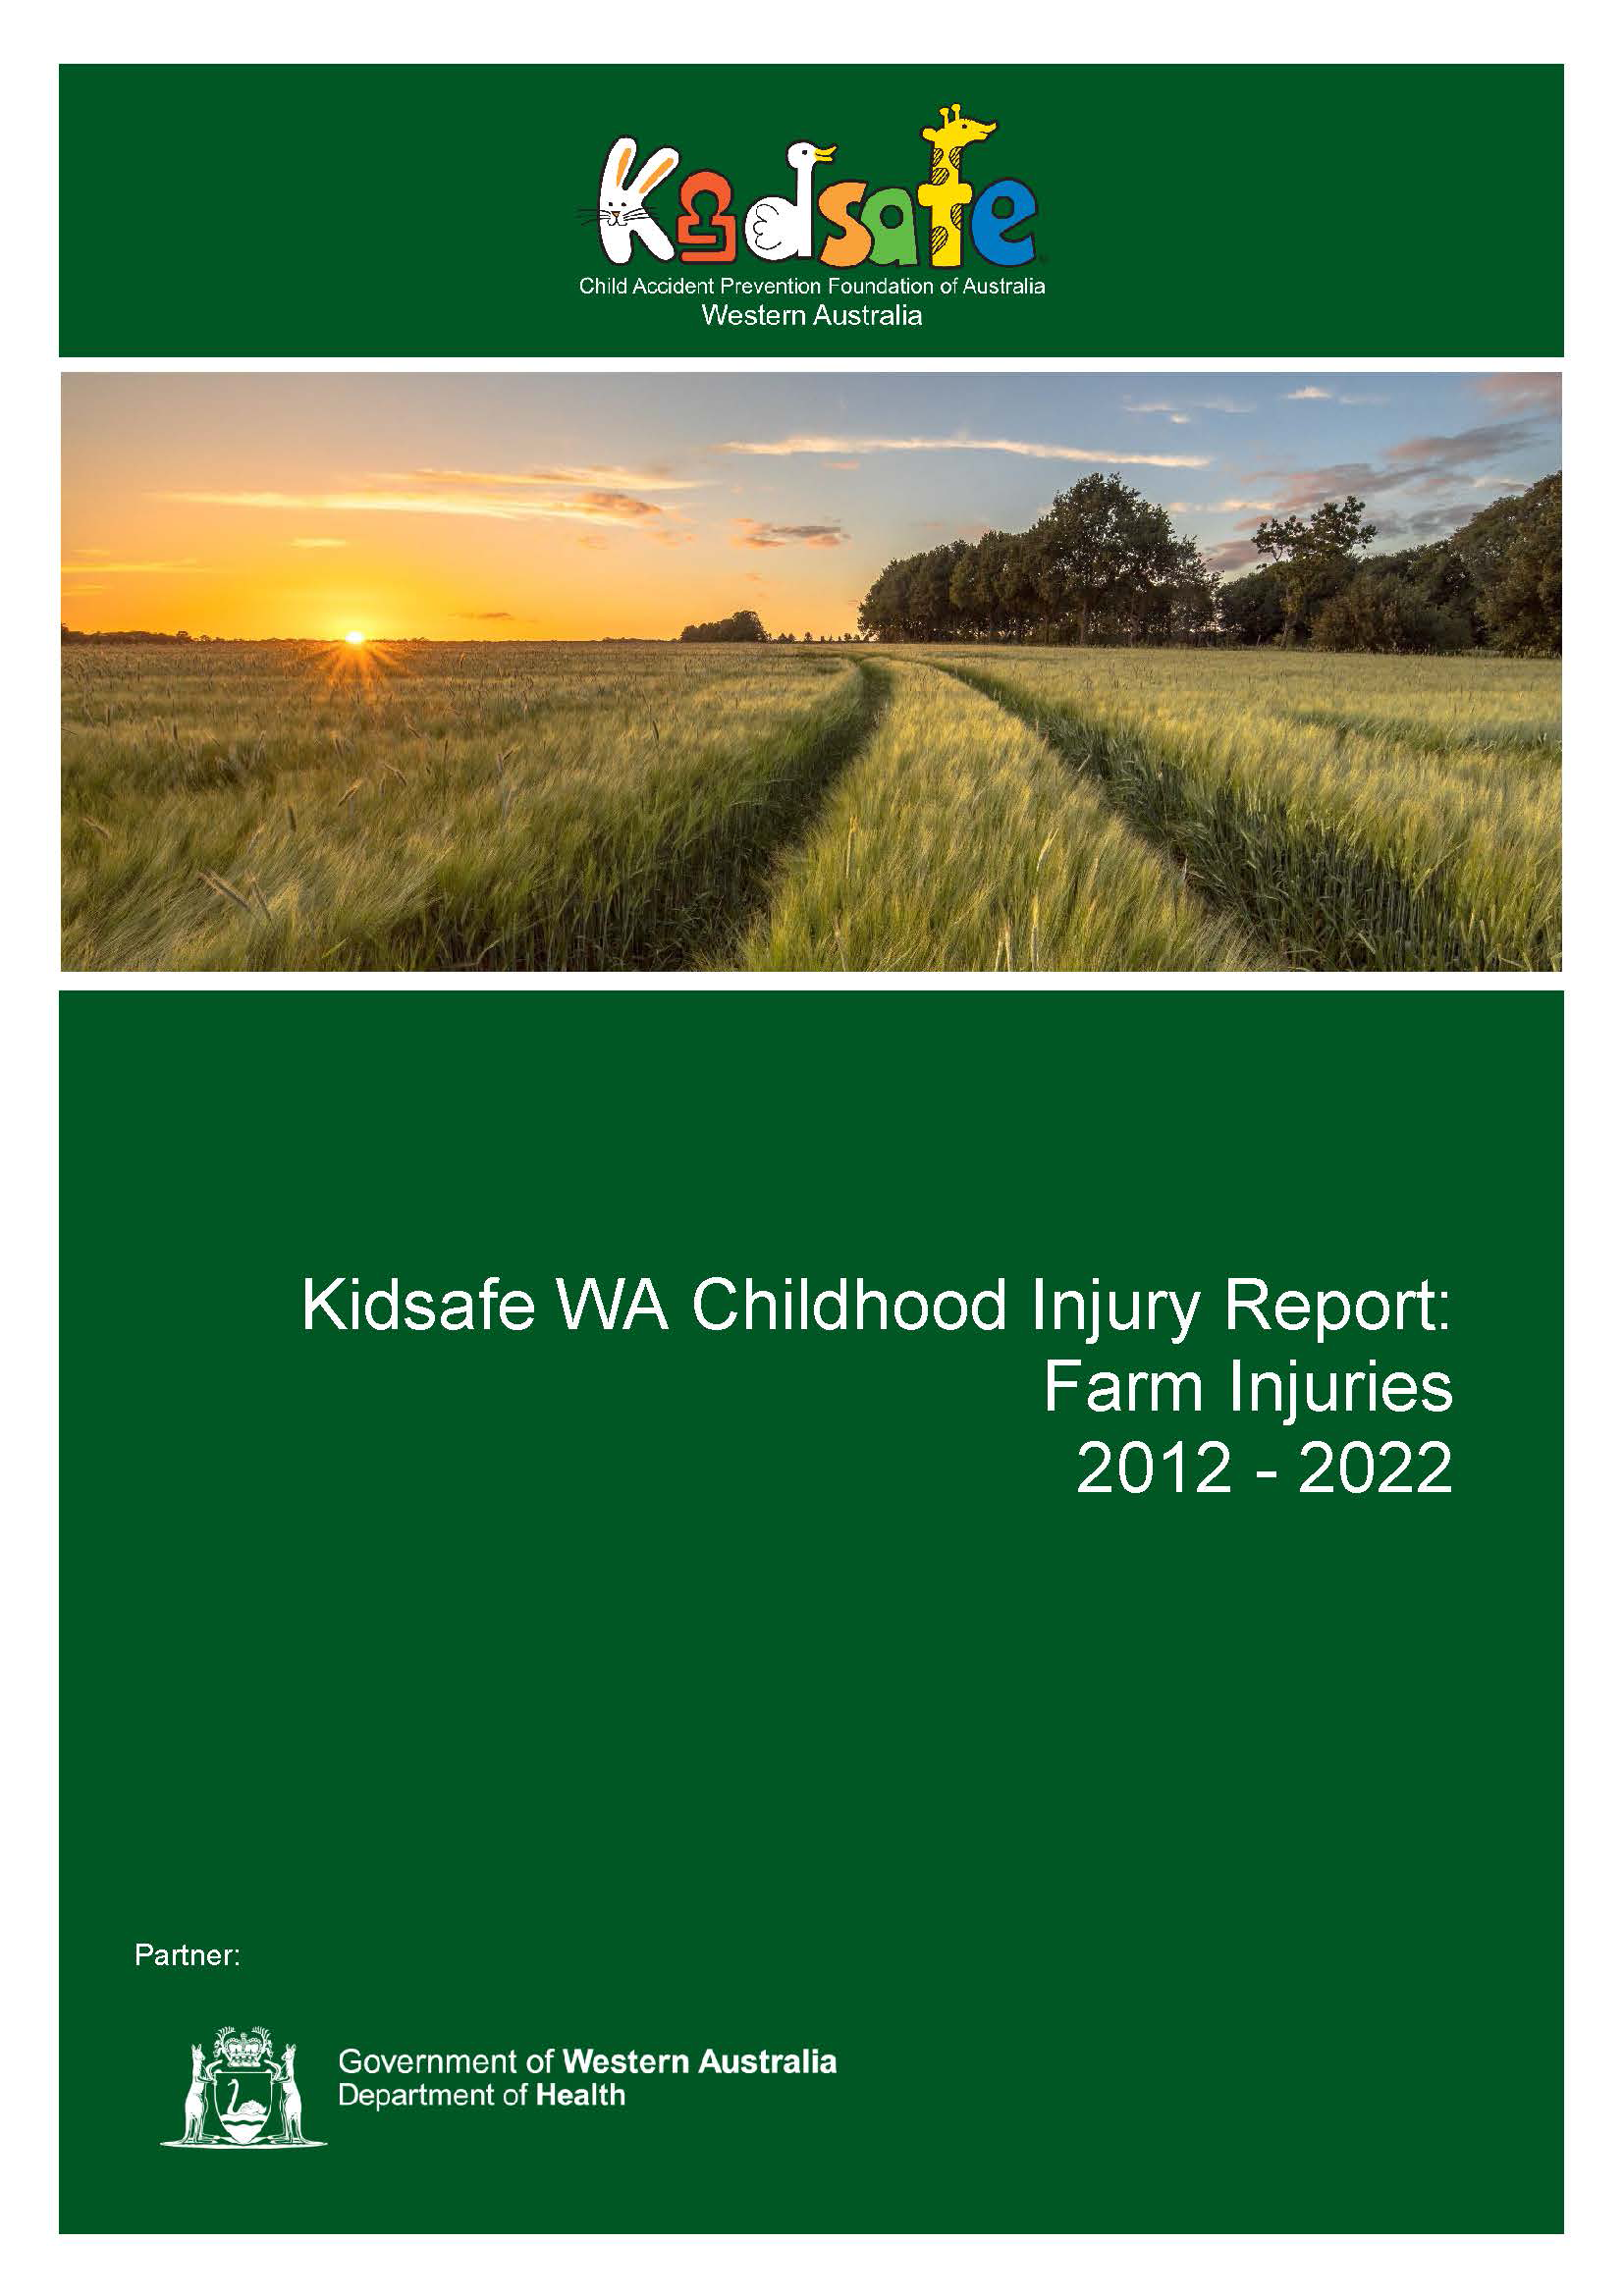 Farm Injury Research Report 2012-2022